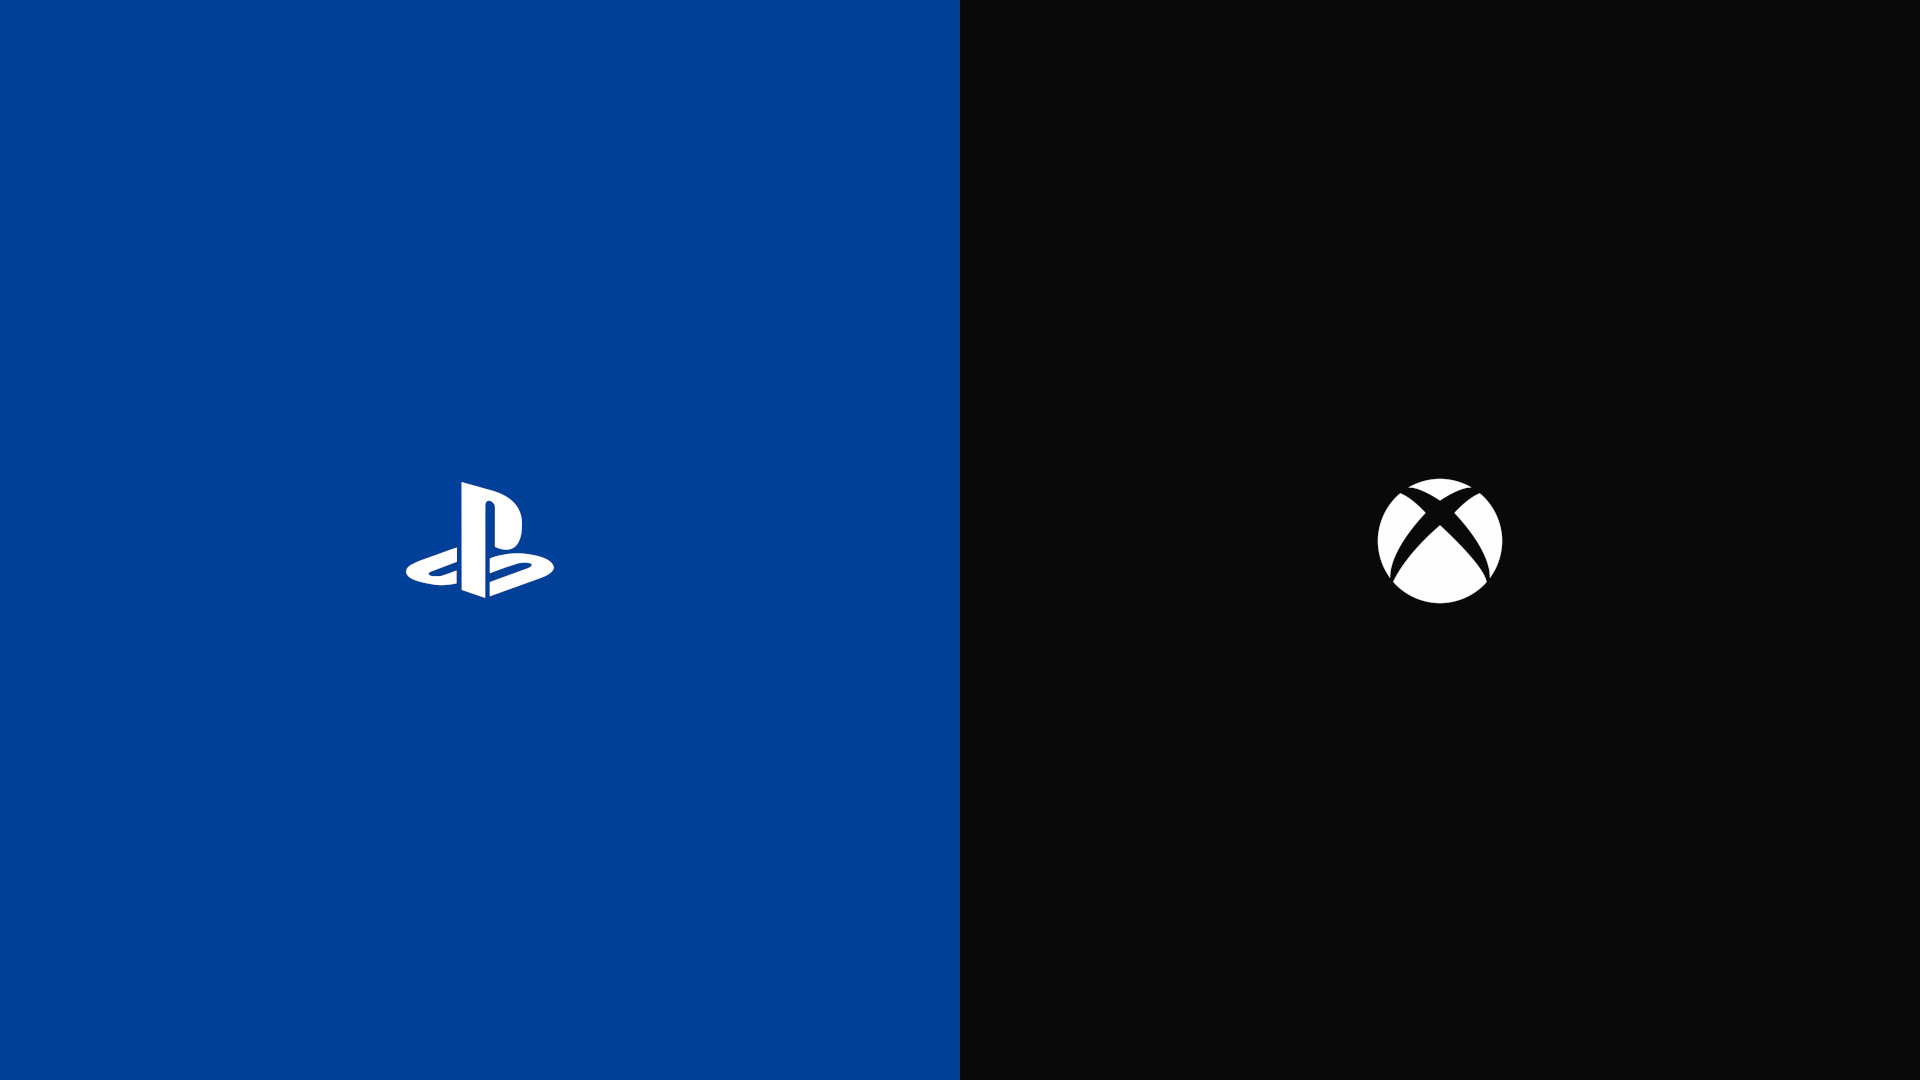 1920x1080 Ps4 Logo Wallpaper Images Pictures Becuo 